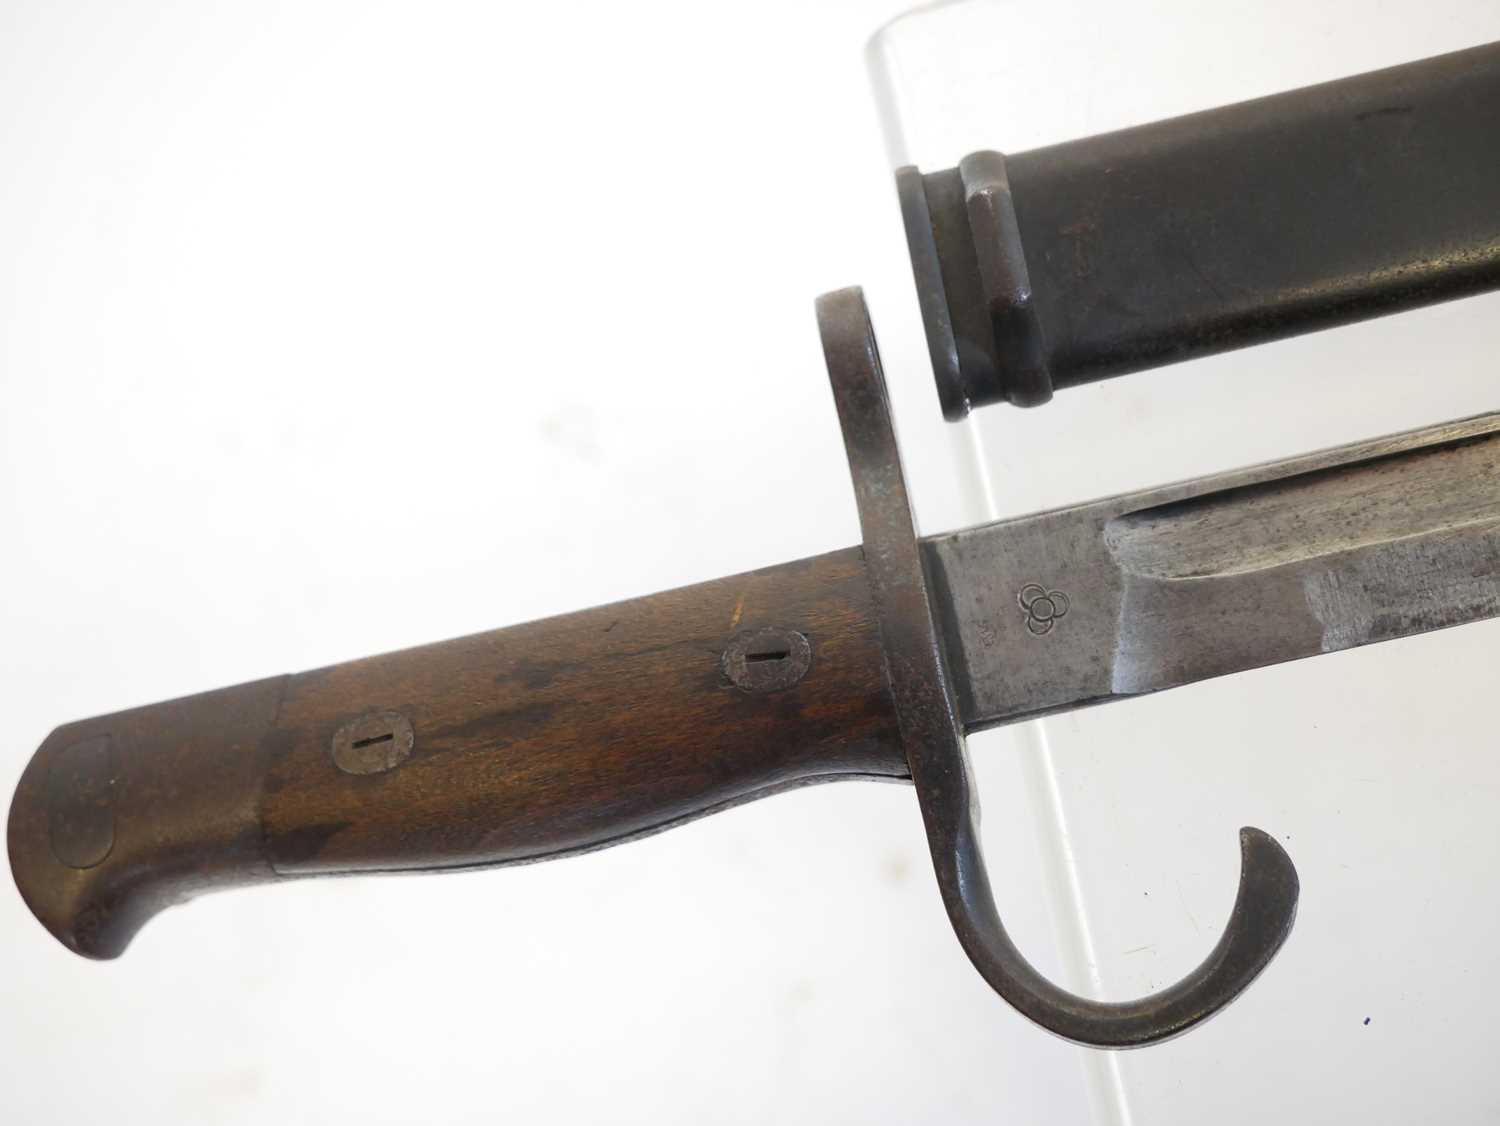 Japanese Arisaka type 30 bayonet and scabbard. Buyer must be over the age of 18. Age verification ID - Image 3 of 9